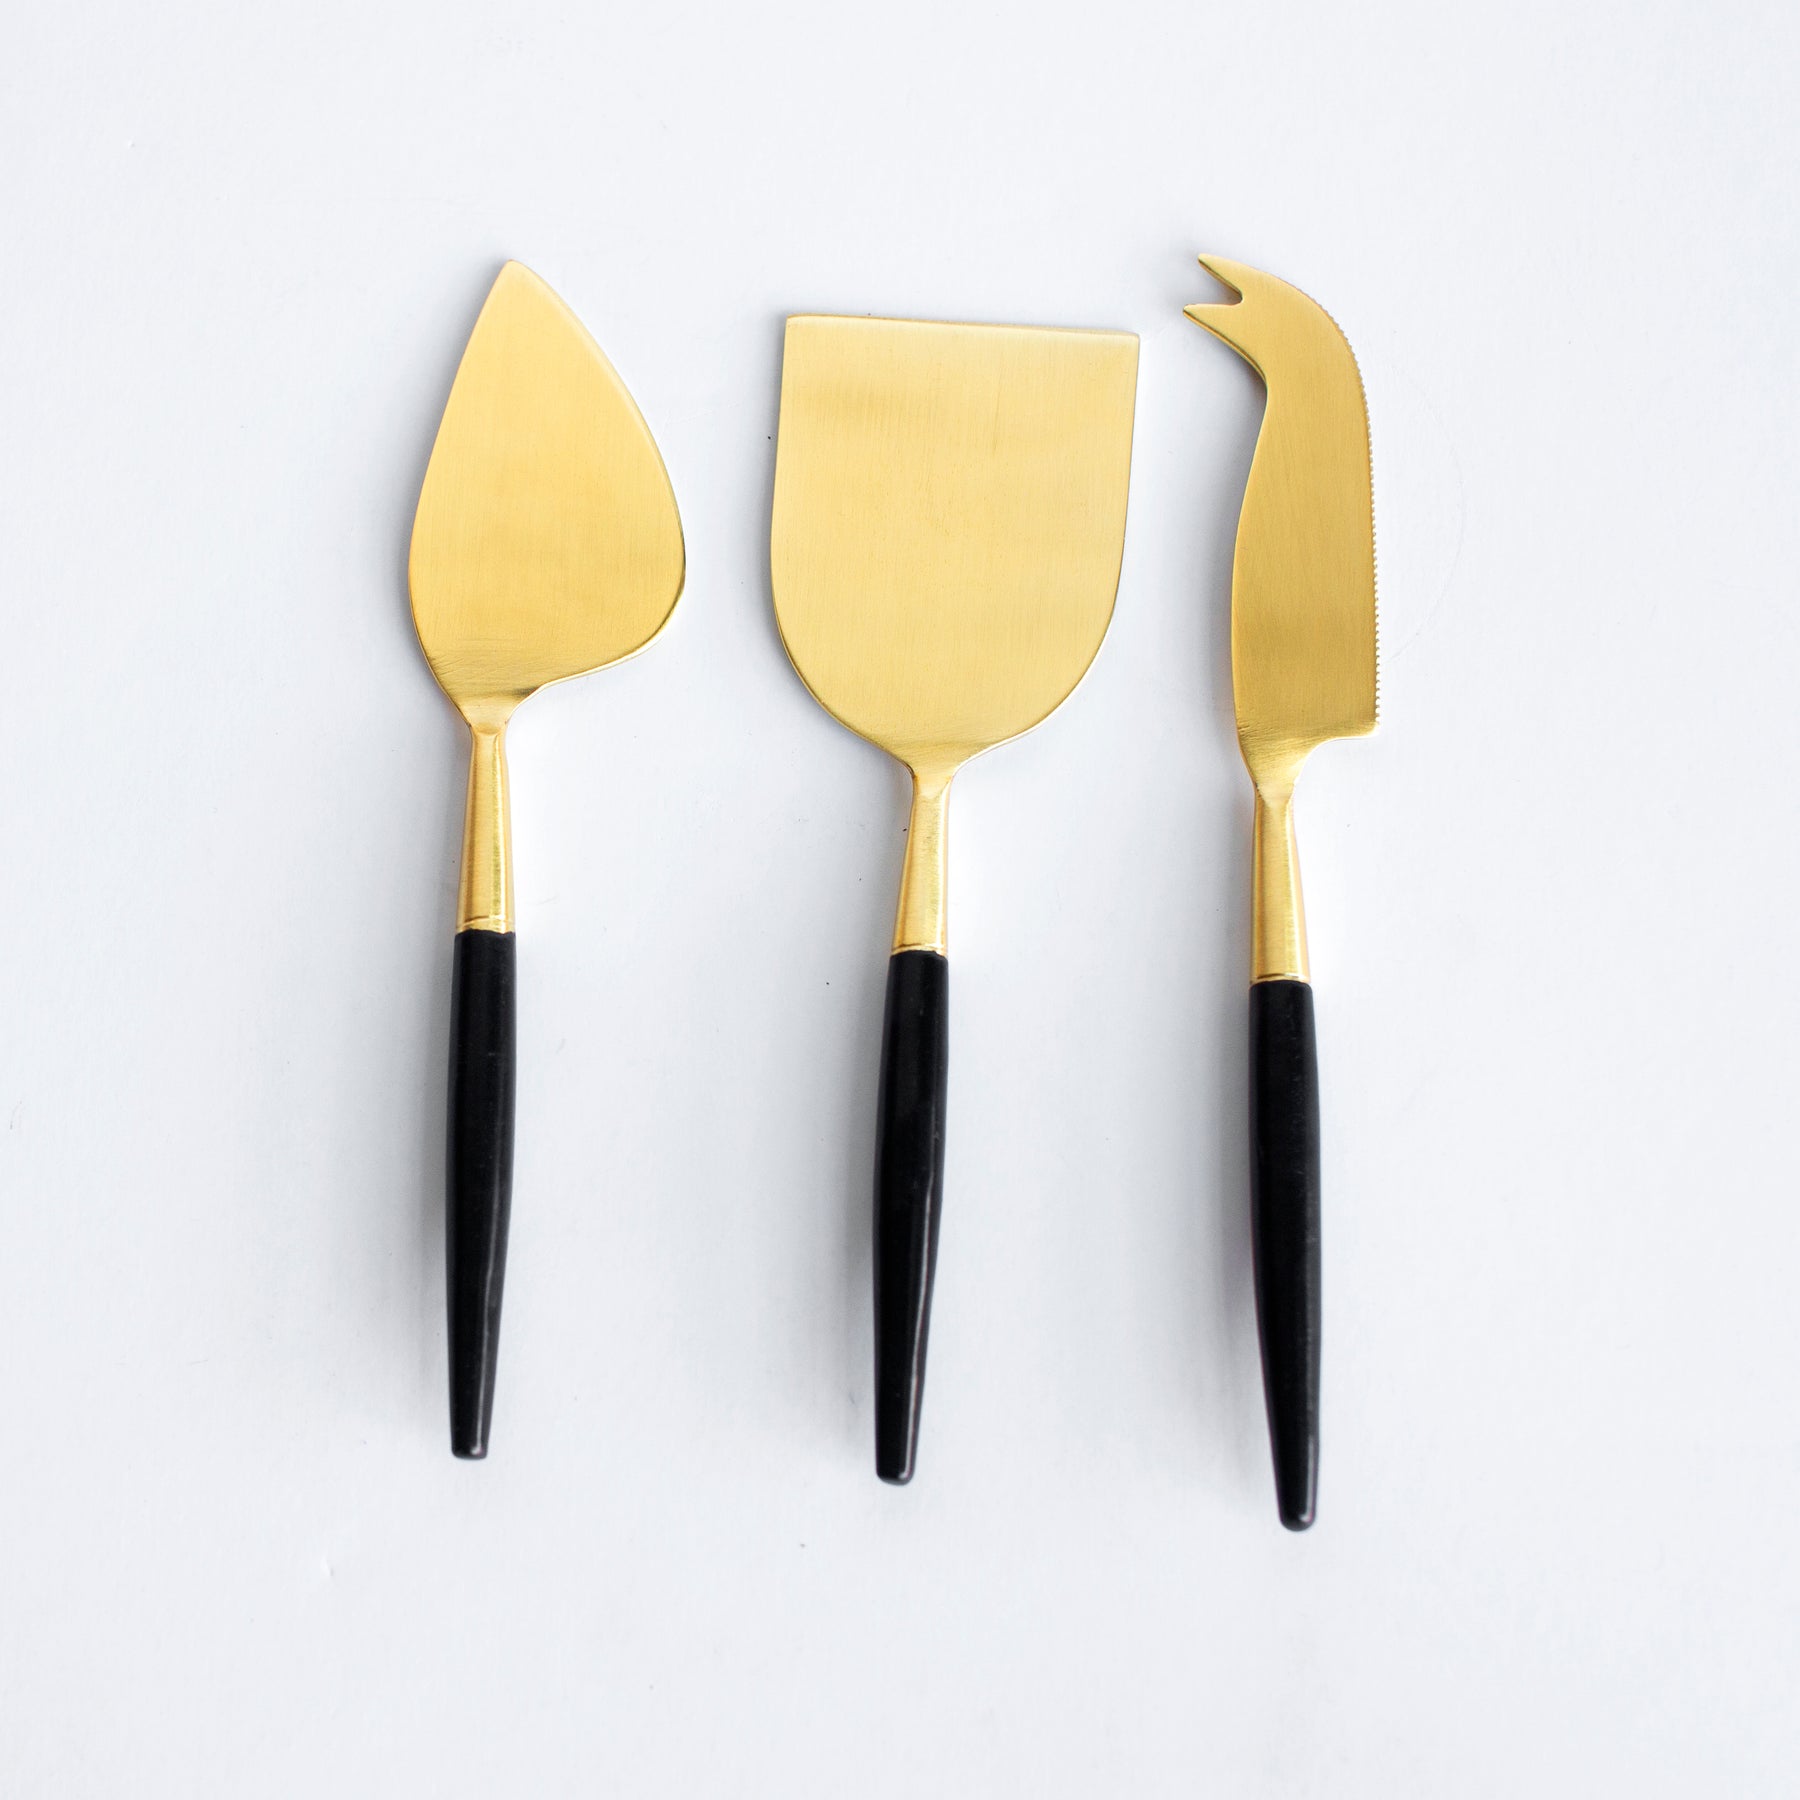 Black and Gold Design Cheese Knives Set of 4 – CoCo B. Kitchen & Home